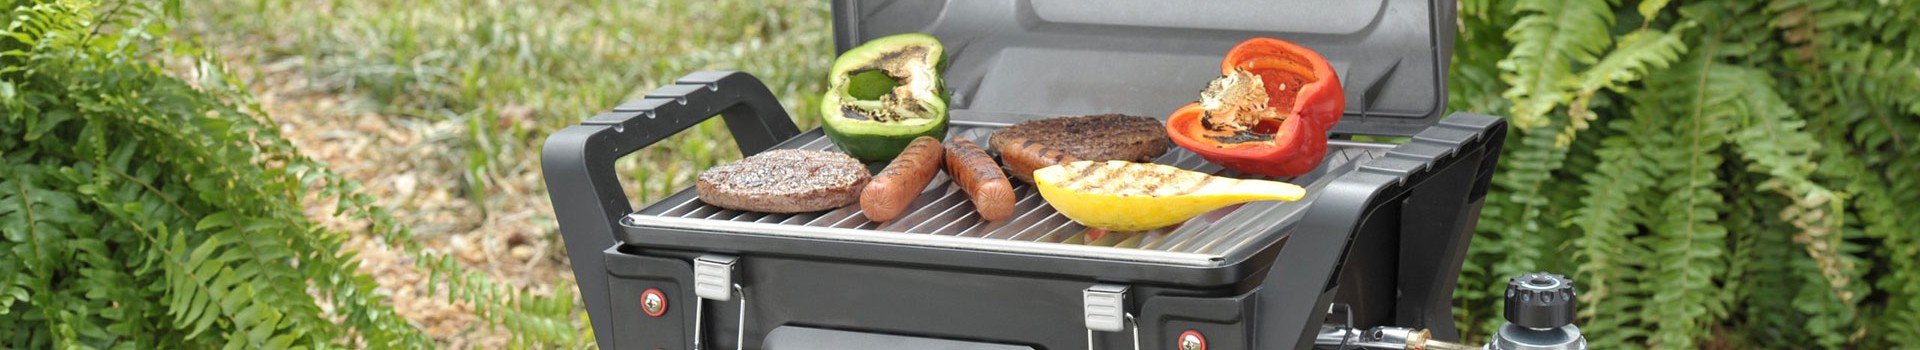 Portable barbecues at barbecueportugal.com